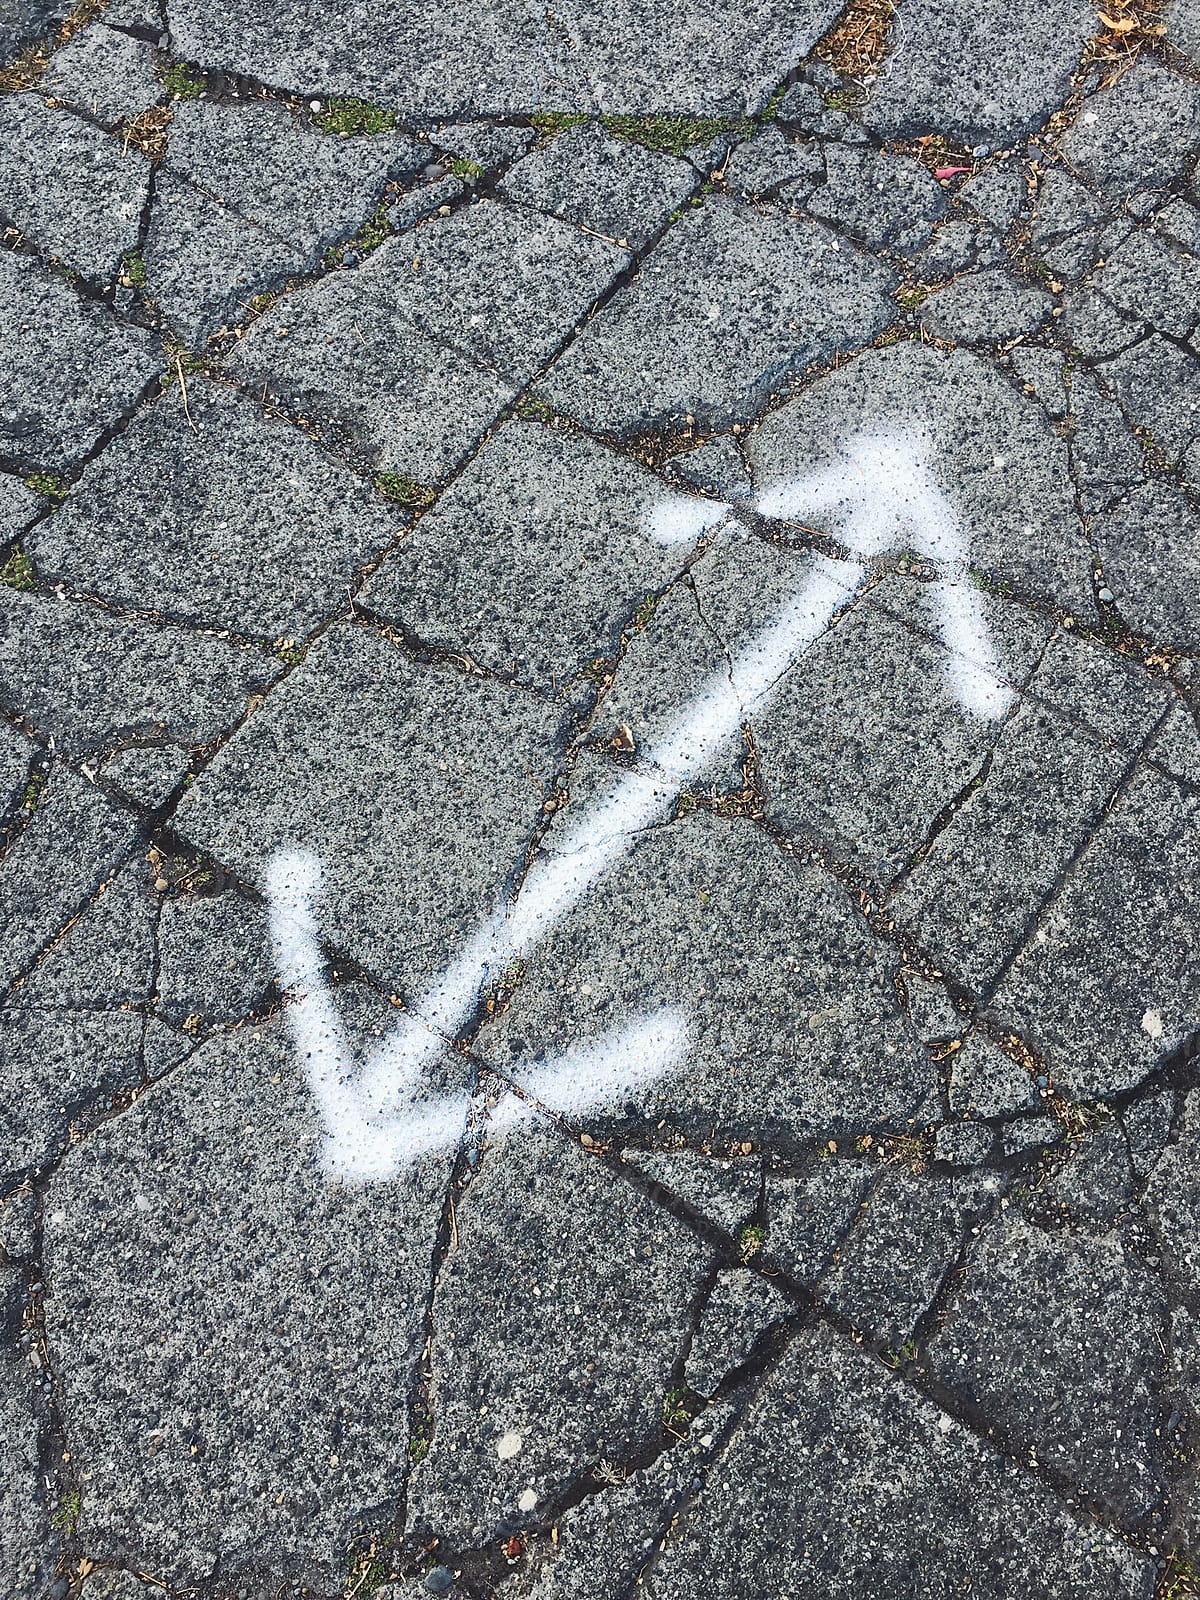 Spray painted double arrow sign on worn and cracked sidewalk